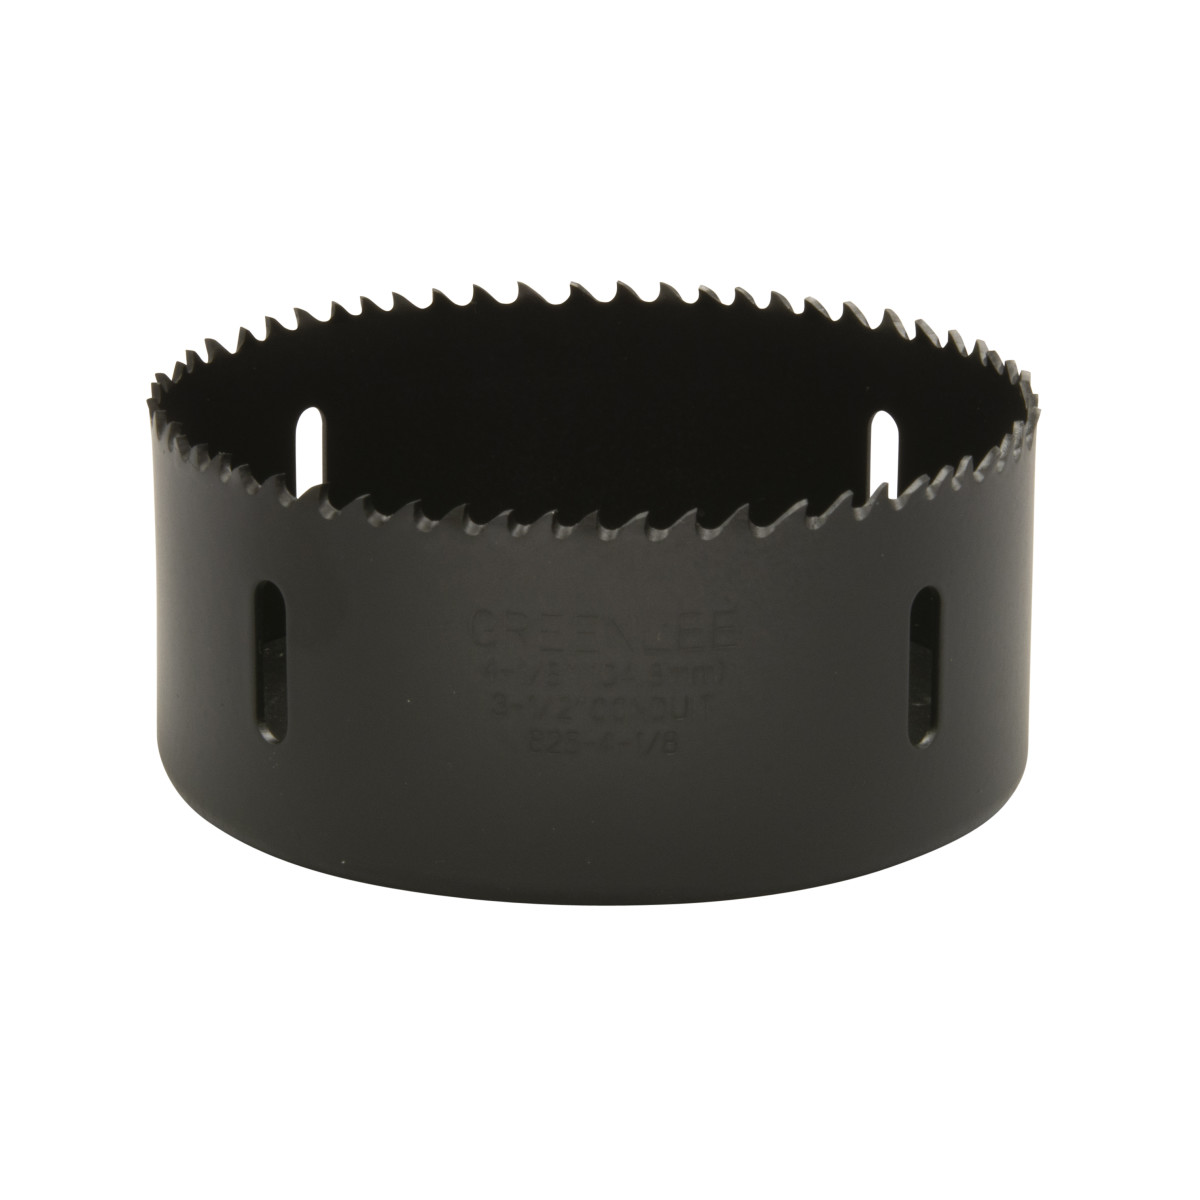 Bi-Metal Hole Saw, Actual Hole Size 3-5/8" (92.1 mm).  Cut through steel, tin, aluminum, fiberglass, wood and plastic.  Deep 1-5/8" (41.3 mm) cutting depth allows for cutting through 2" x 4" wood studs.  Extra-tough bi-metal blade- we use the highest grade oftool steel to outlast competitor's blades. That beats premature saw replacement and saves you money.  Steam oxide finish - no paint to gum up and slow cutting.  The saw runs cooler for longer life and better performance.  Extra-thick backplate minimizes vibration for smoother, easier, less tiring cutting.  Made in USA.